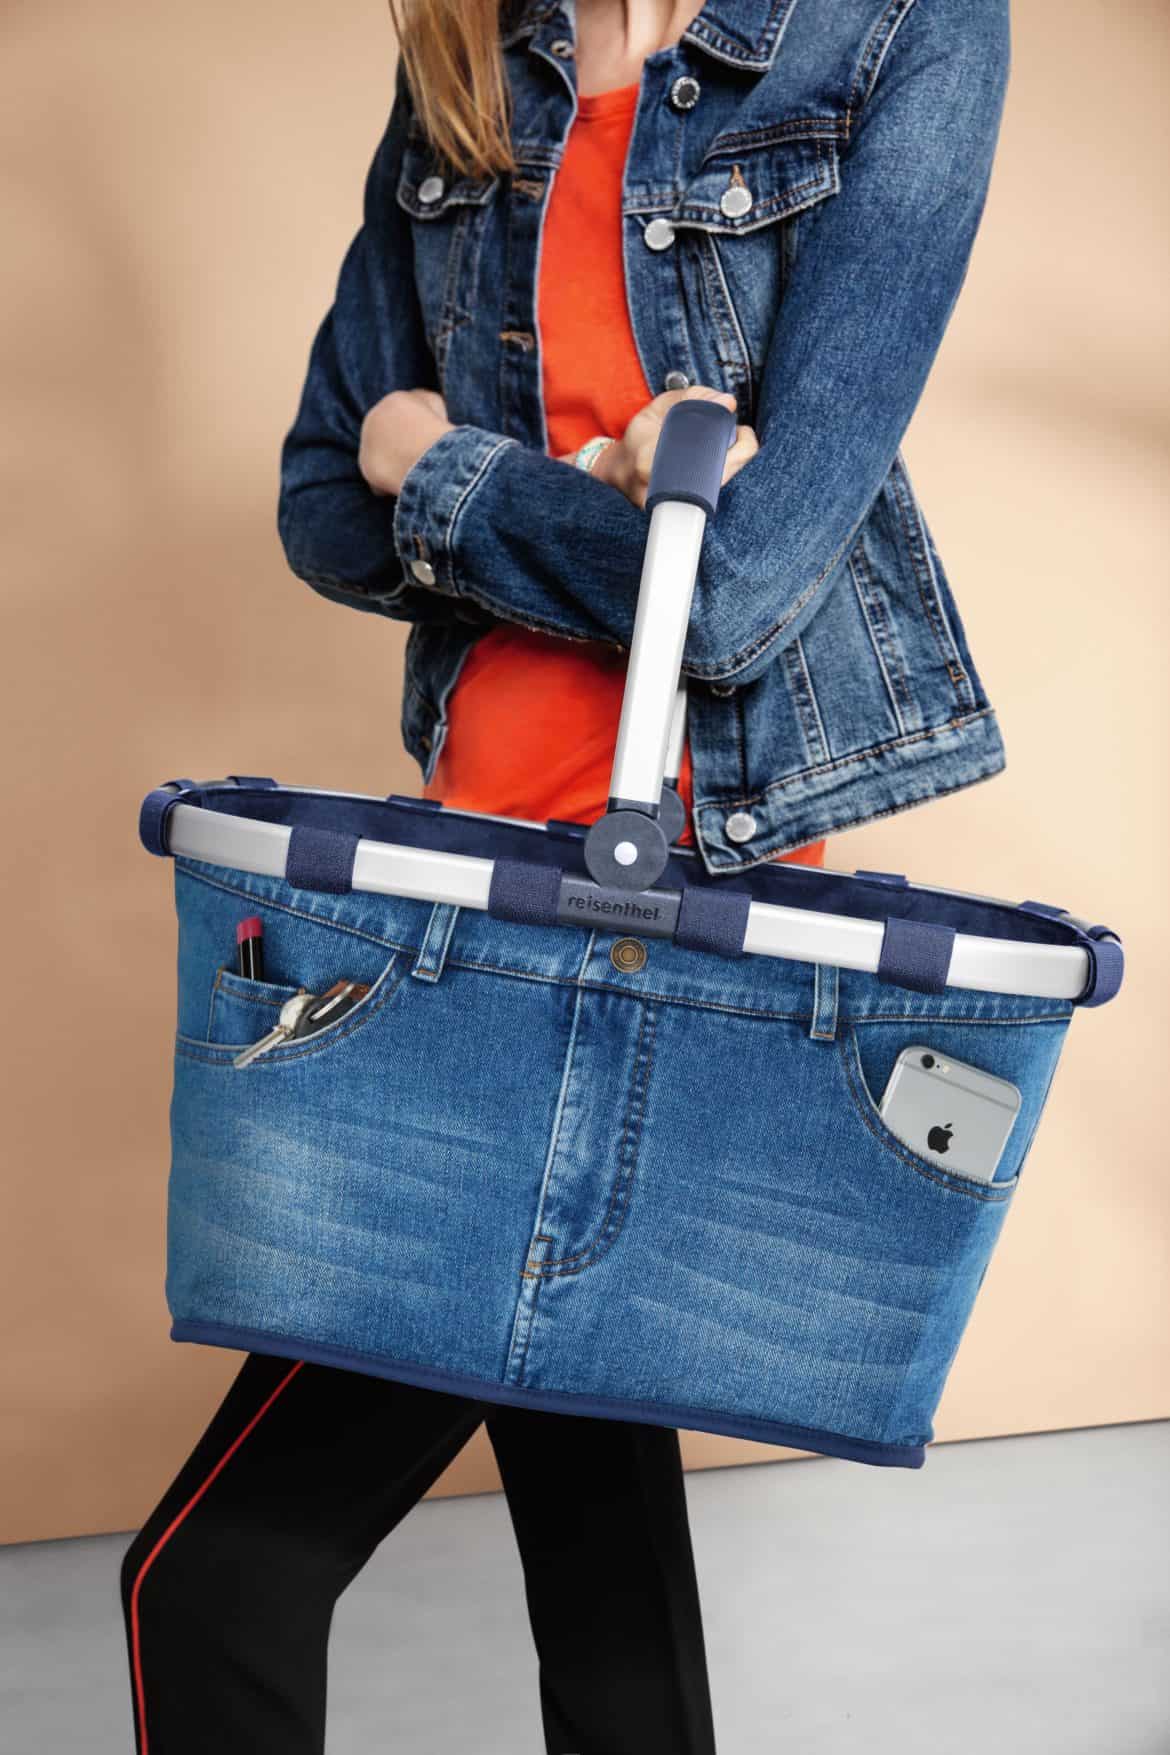 reisenthel lancia il nuovo carrybag jeans